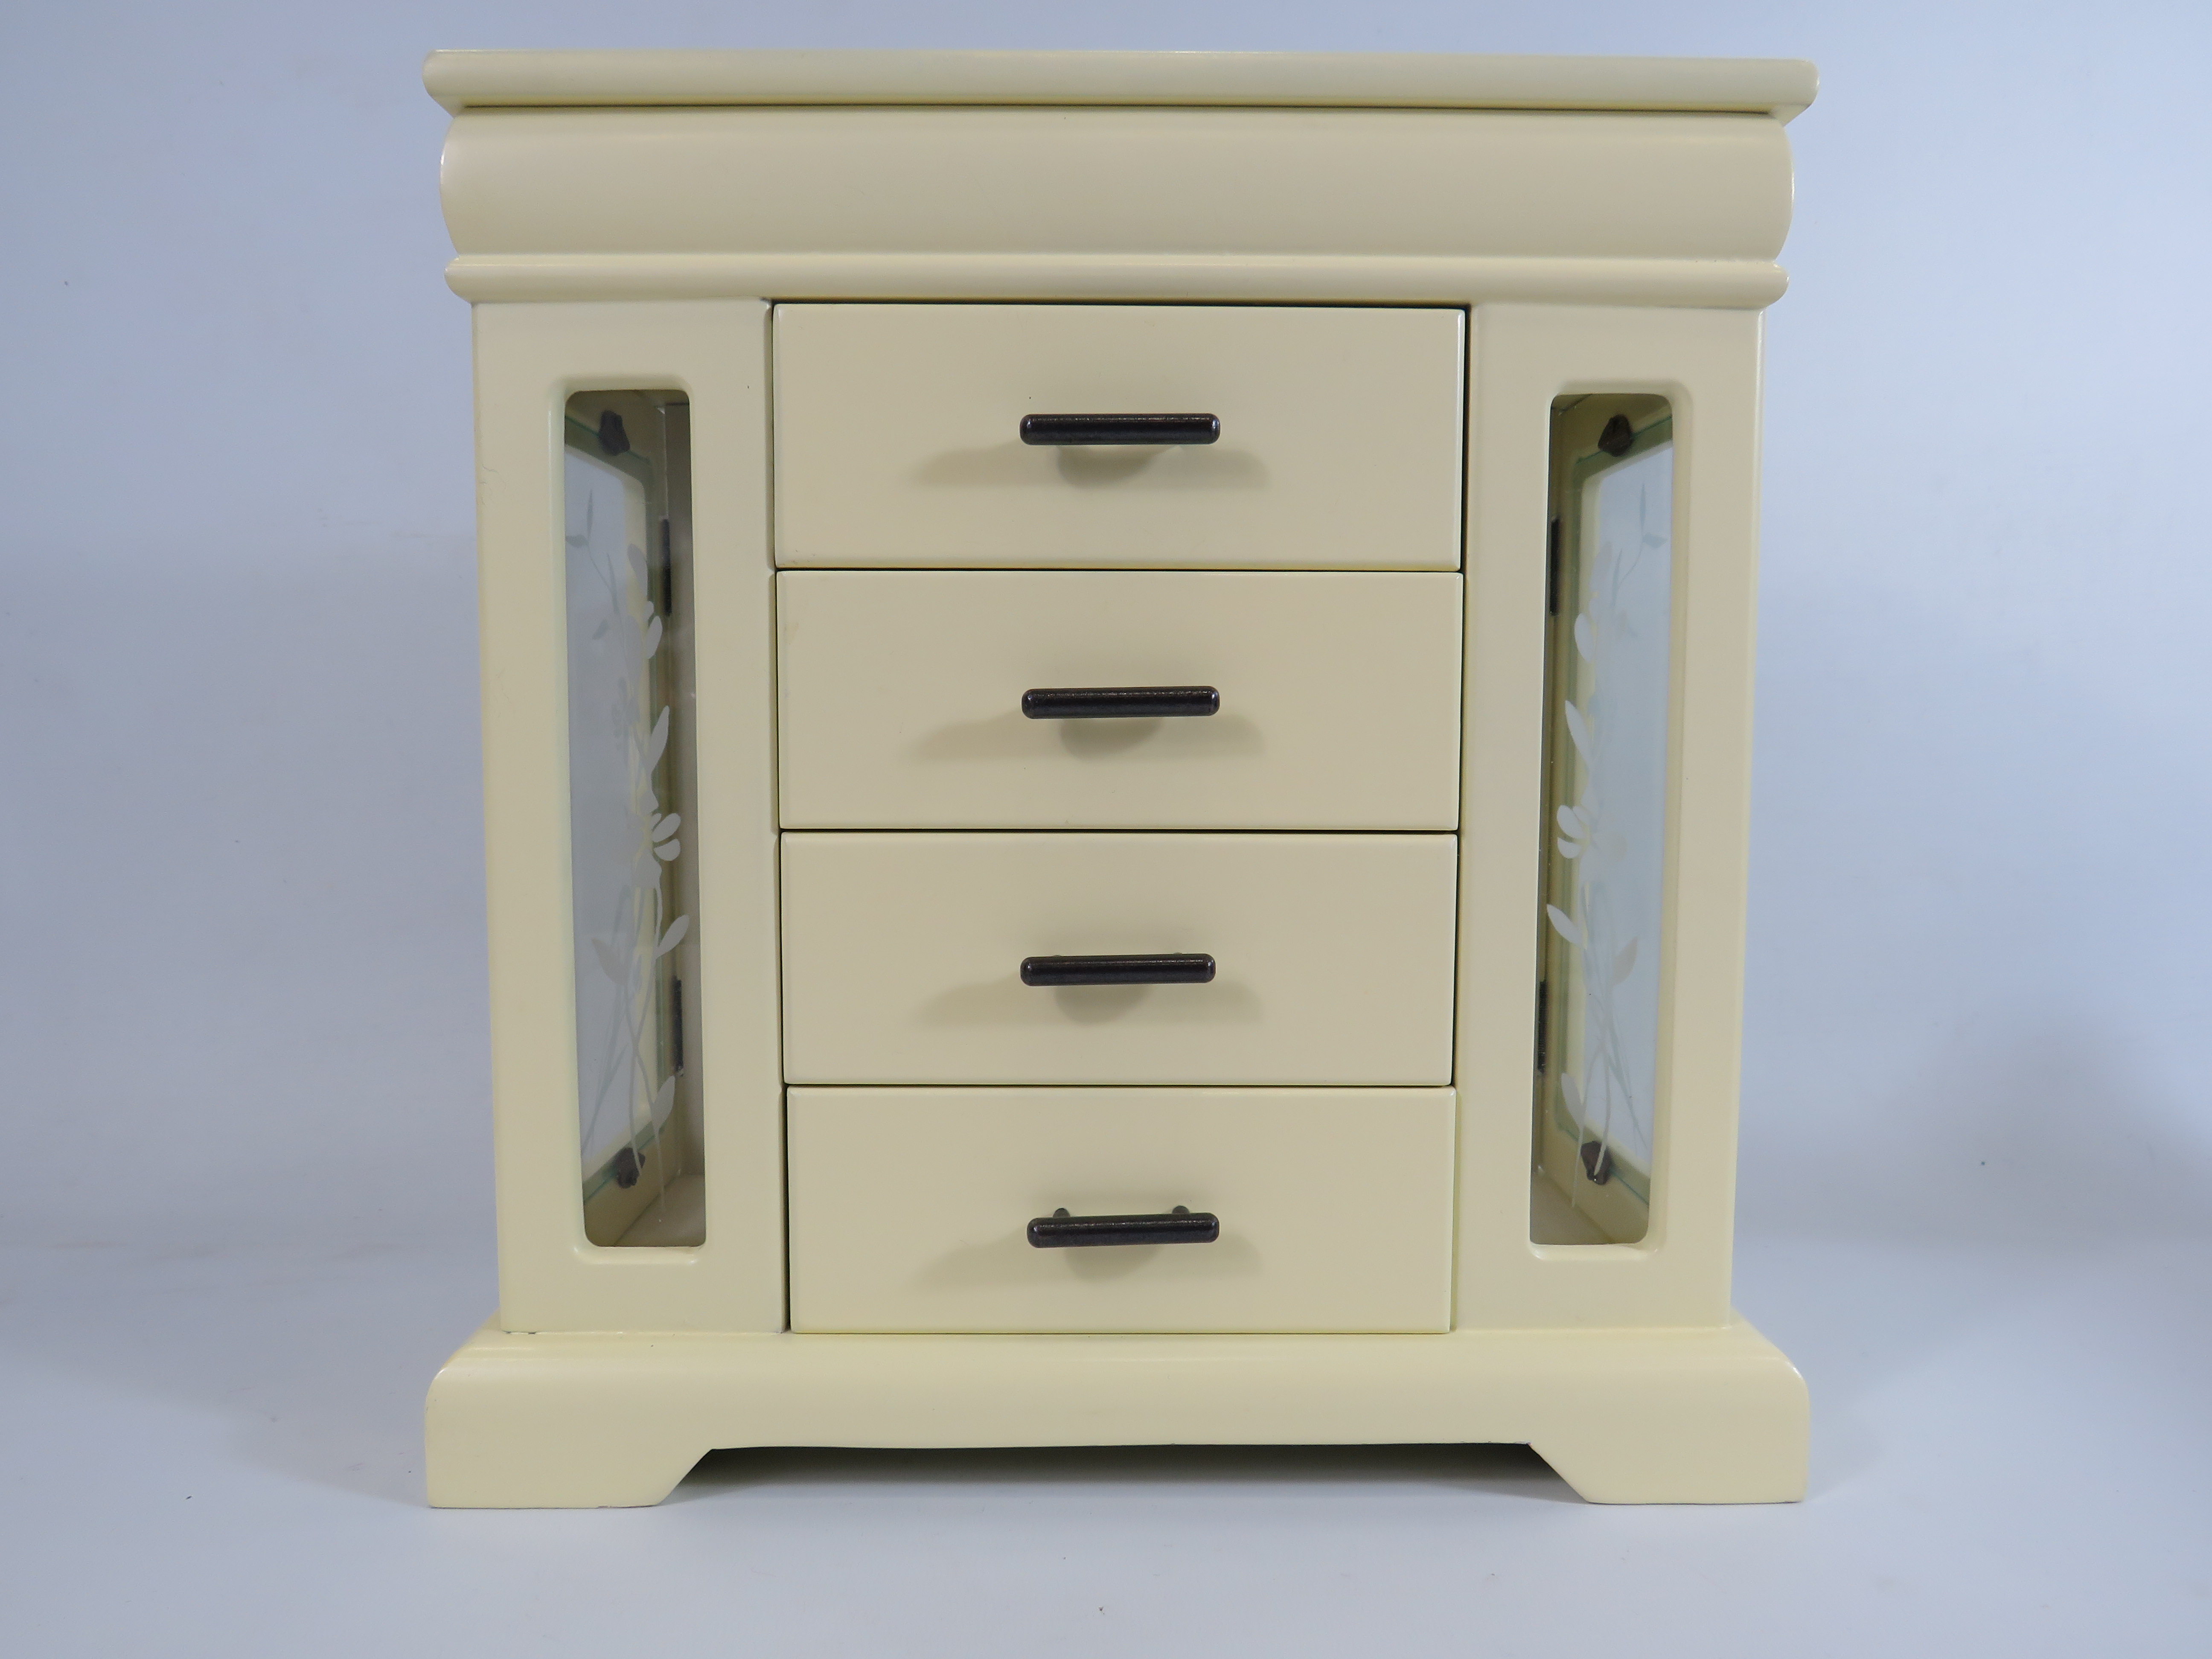 Cream coloured Jewellery cabinet with draws and doors. 12" tall, 11" wide and 5.5" deep